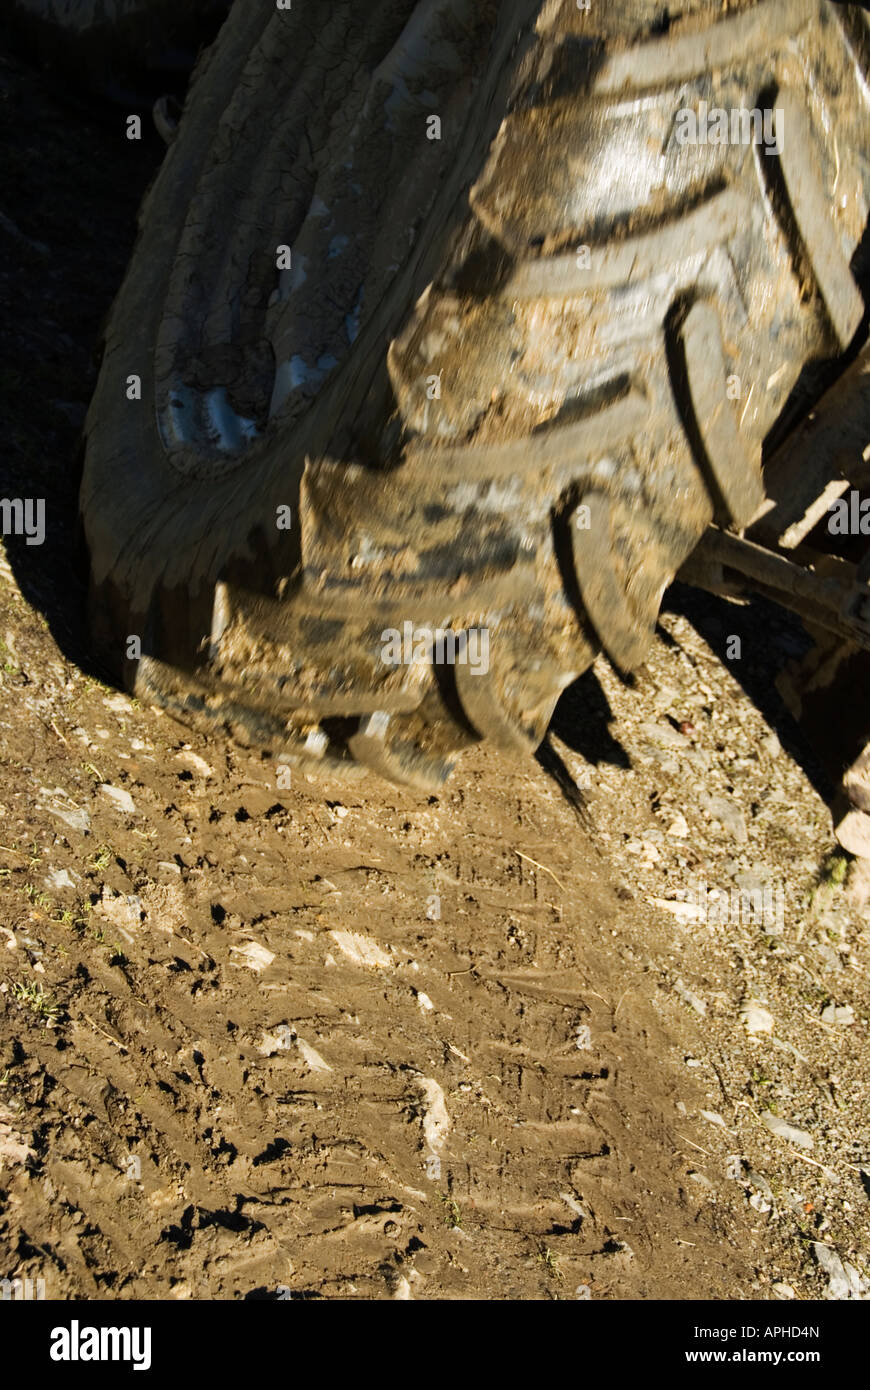 Stock Photo of the imprint from a large tractors wheel in the mud Stock Photo